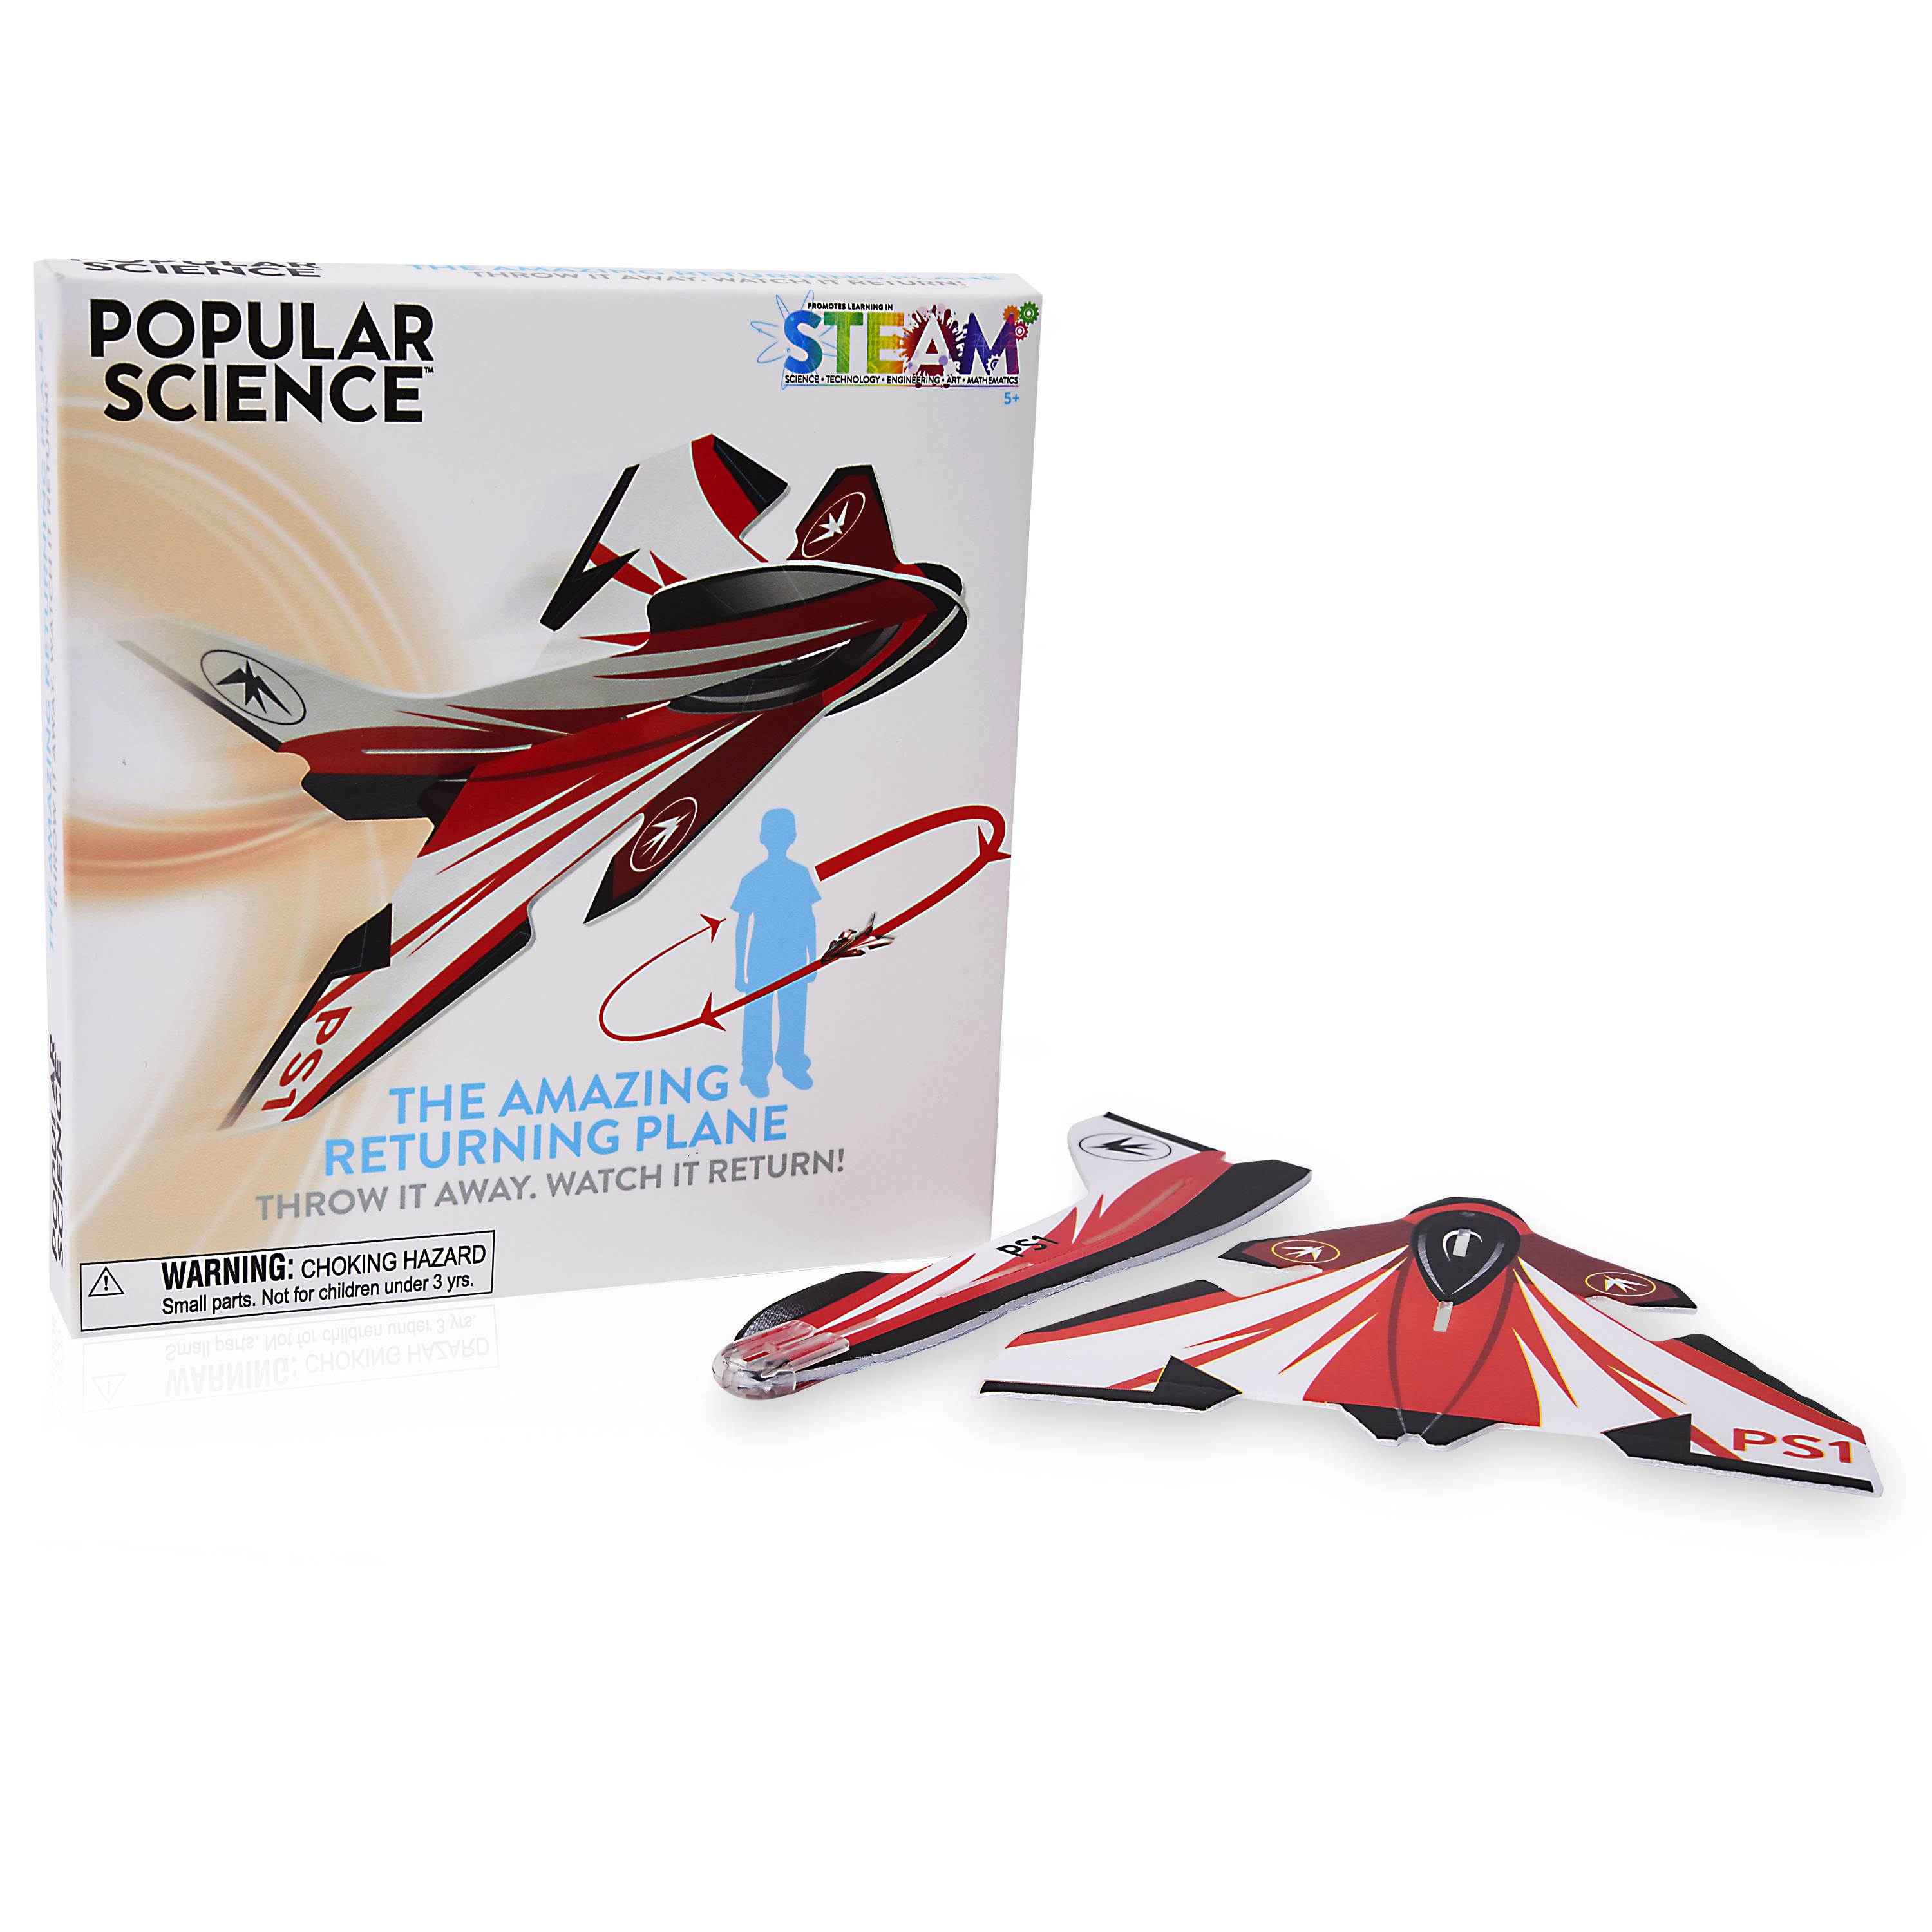 Details about   POPULAR SCIENCE Amazing Returning Plane STEM Educational Toy Birthday /Christmas 